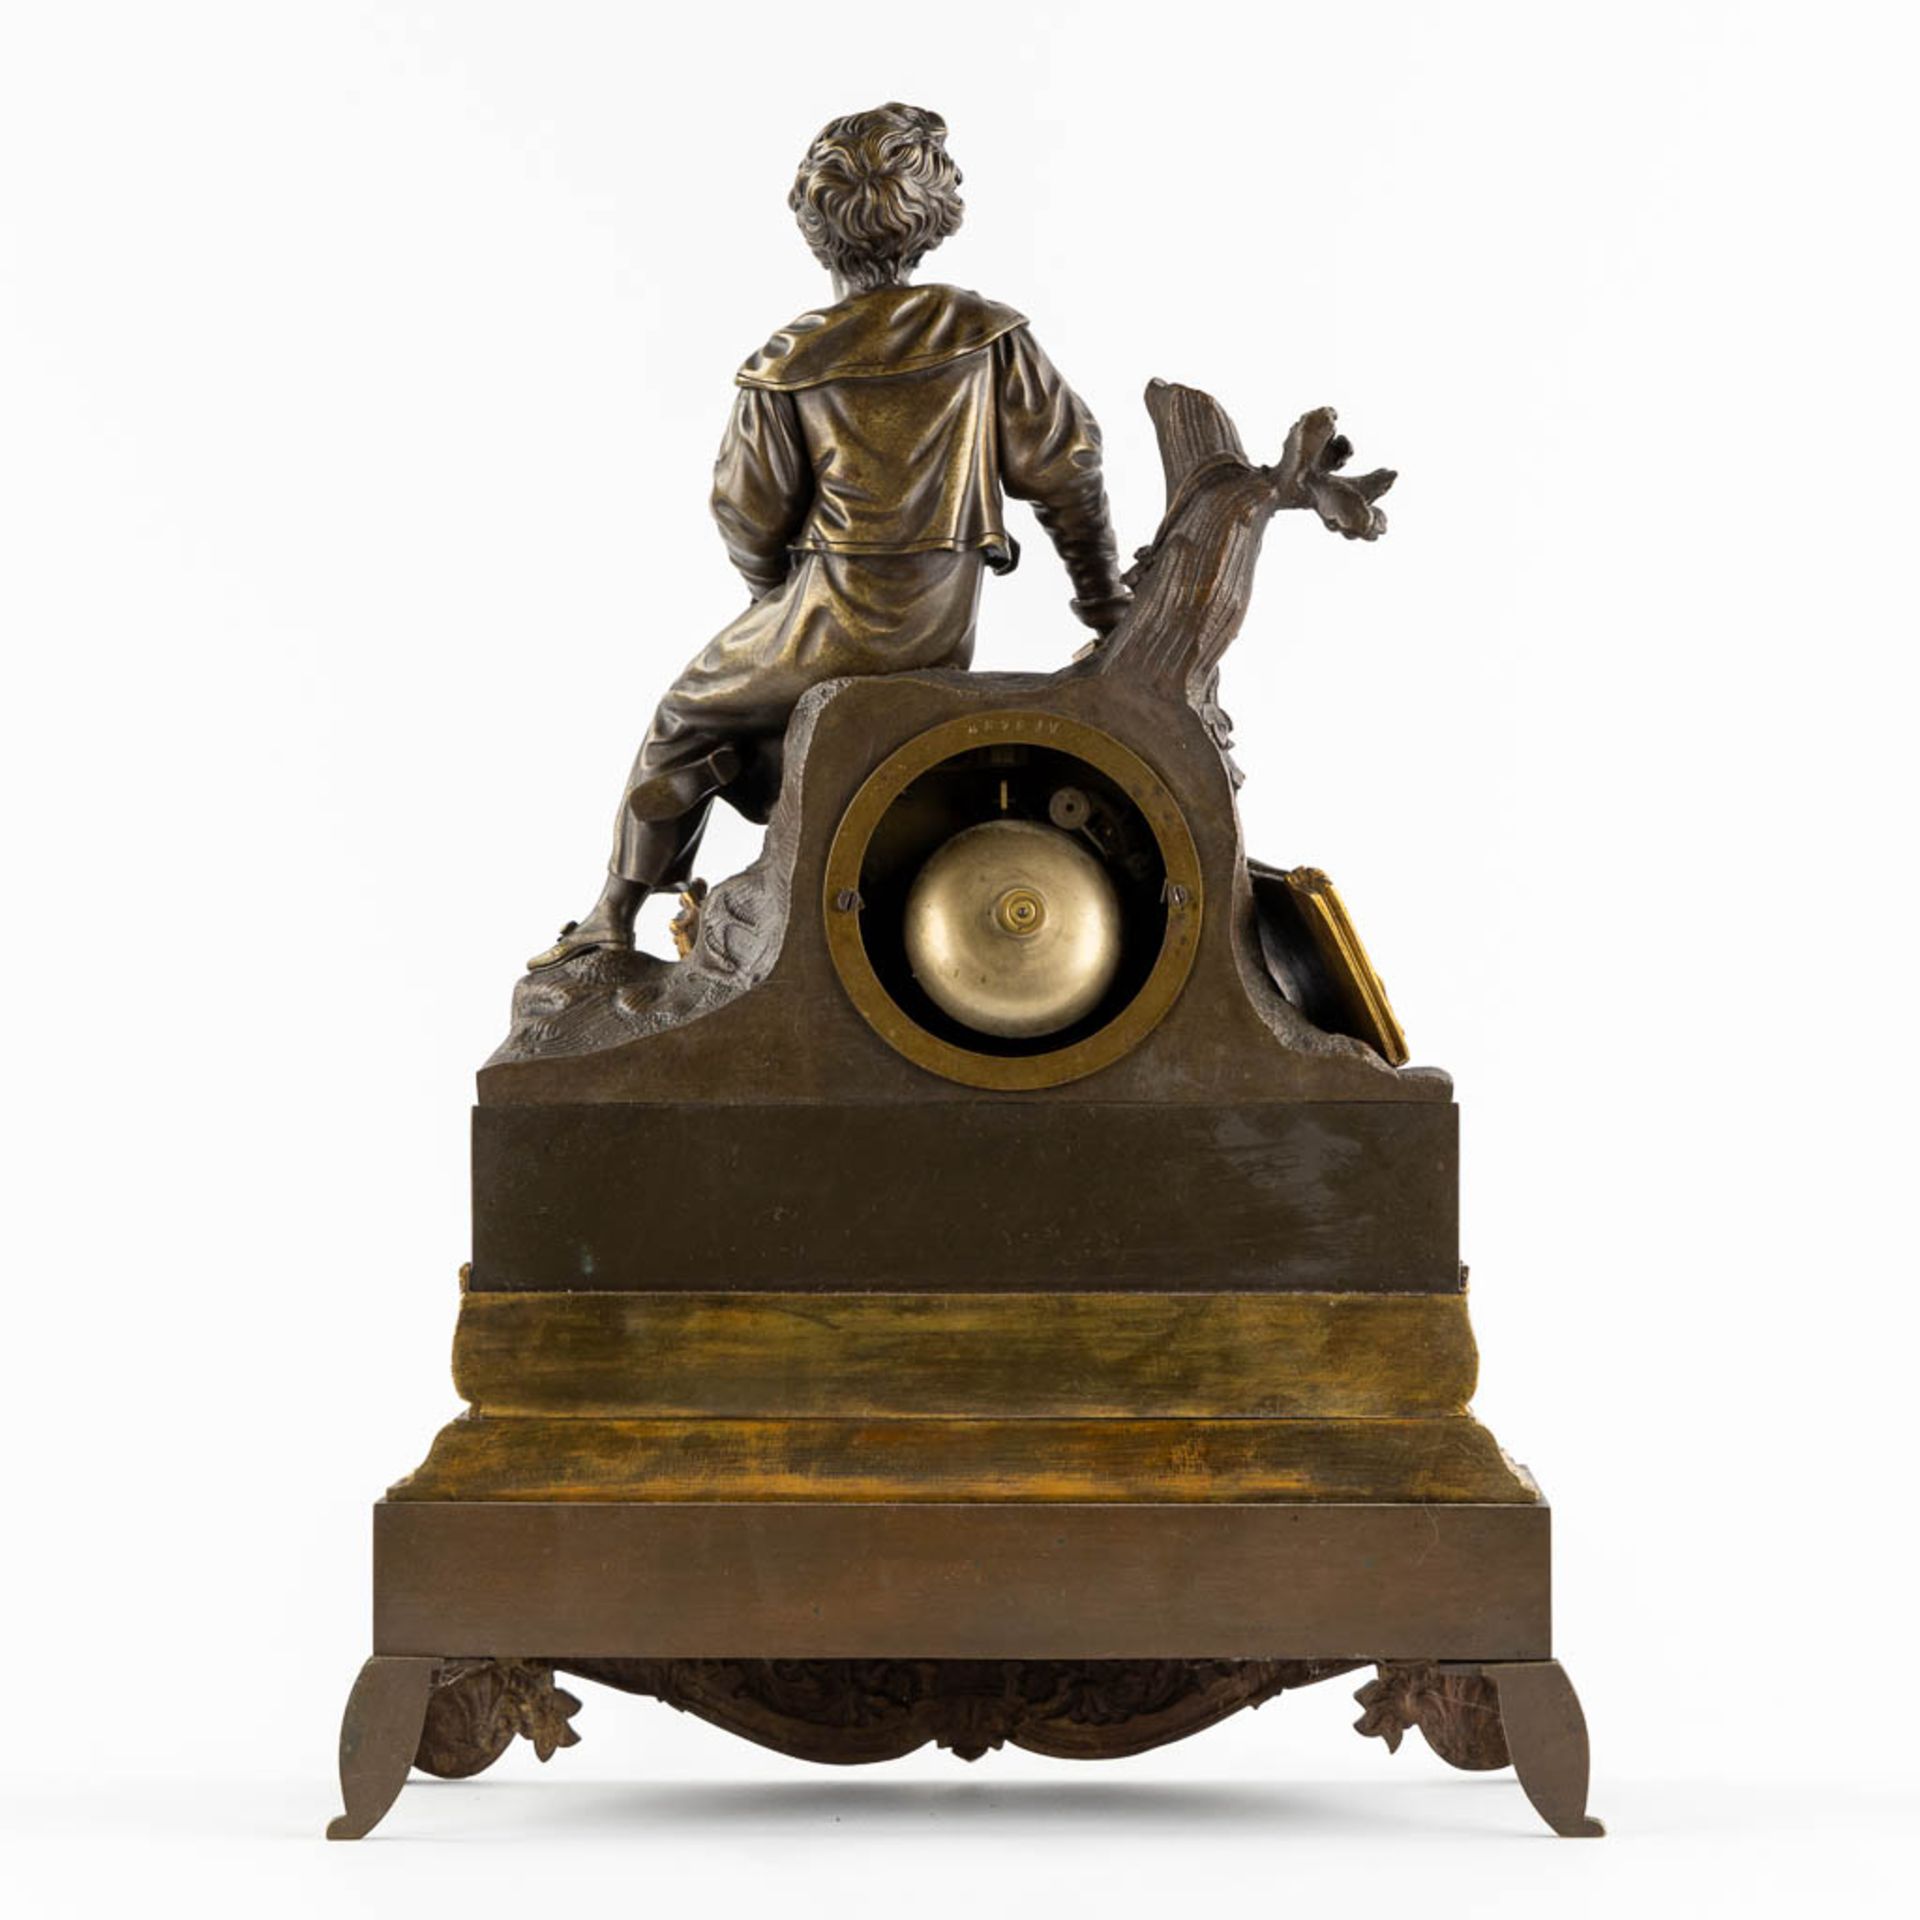 A mantle clock, gilt and patinated bronze, Empire style. 19th C. (L:13 x W:34 x H:46 cm) - Image 5 of 9